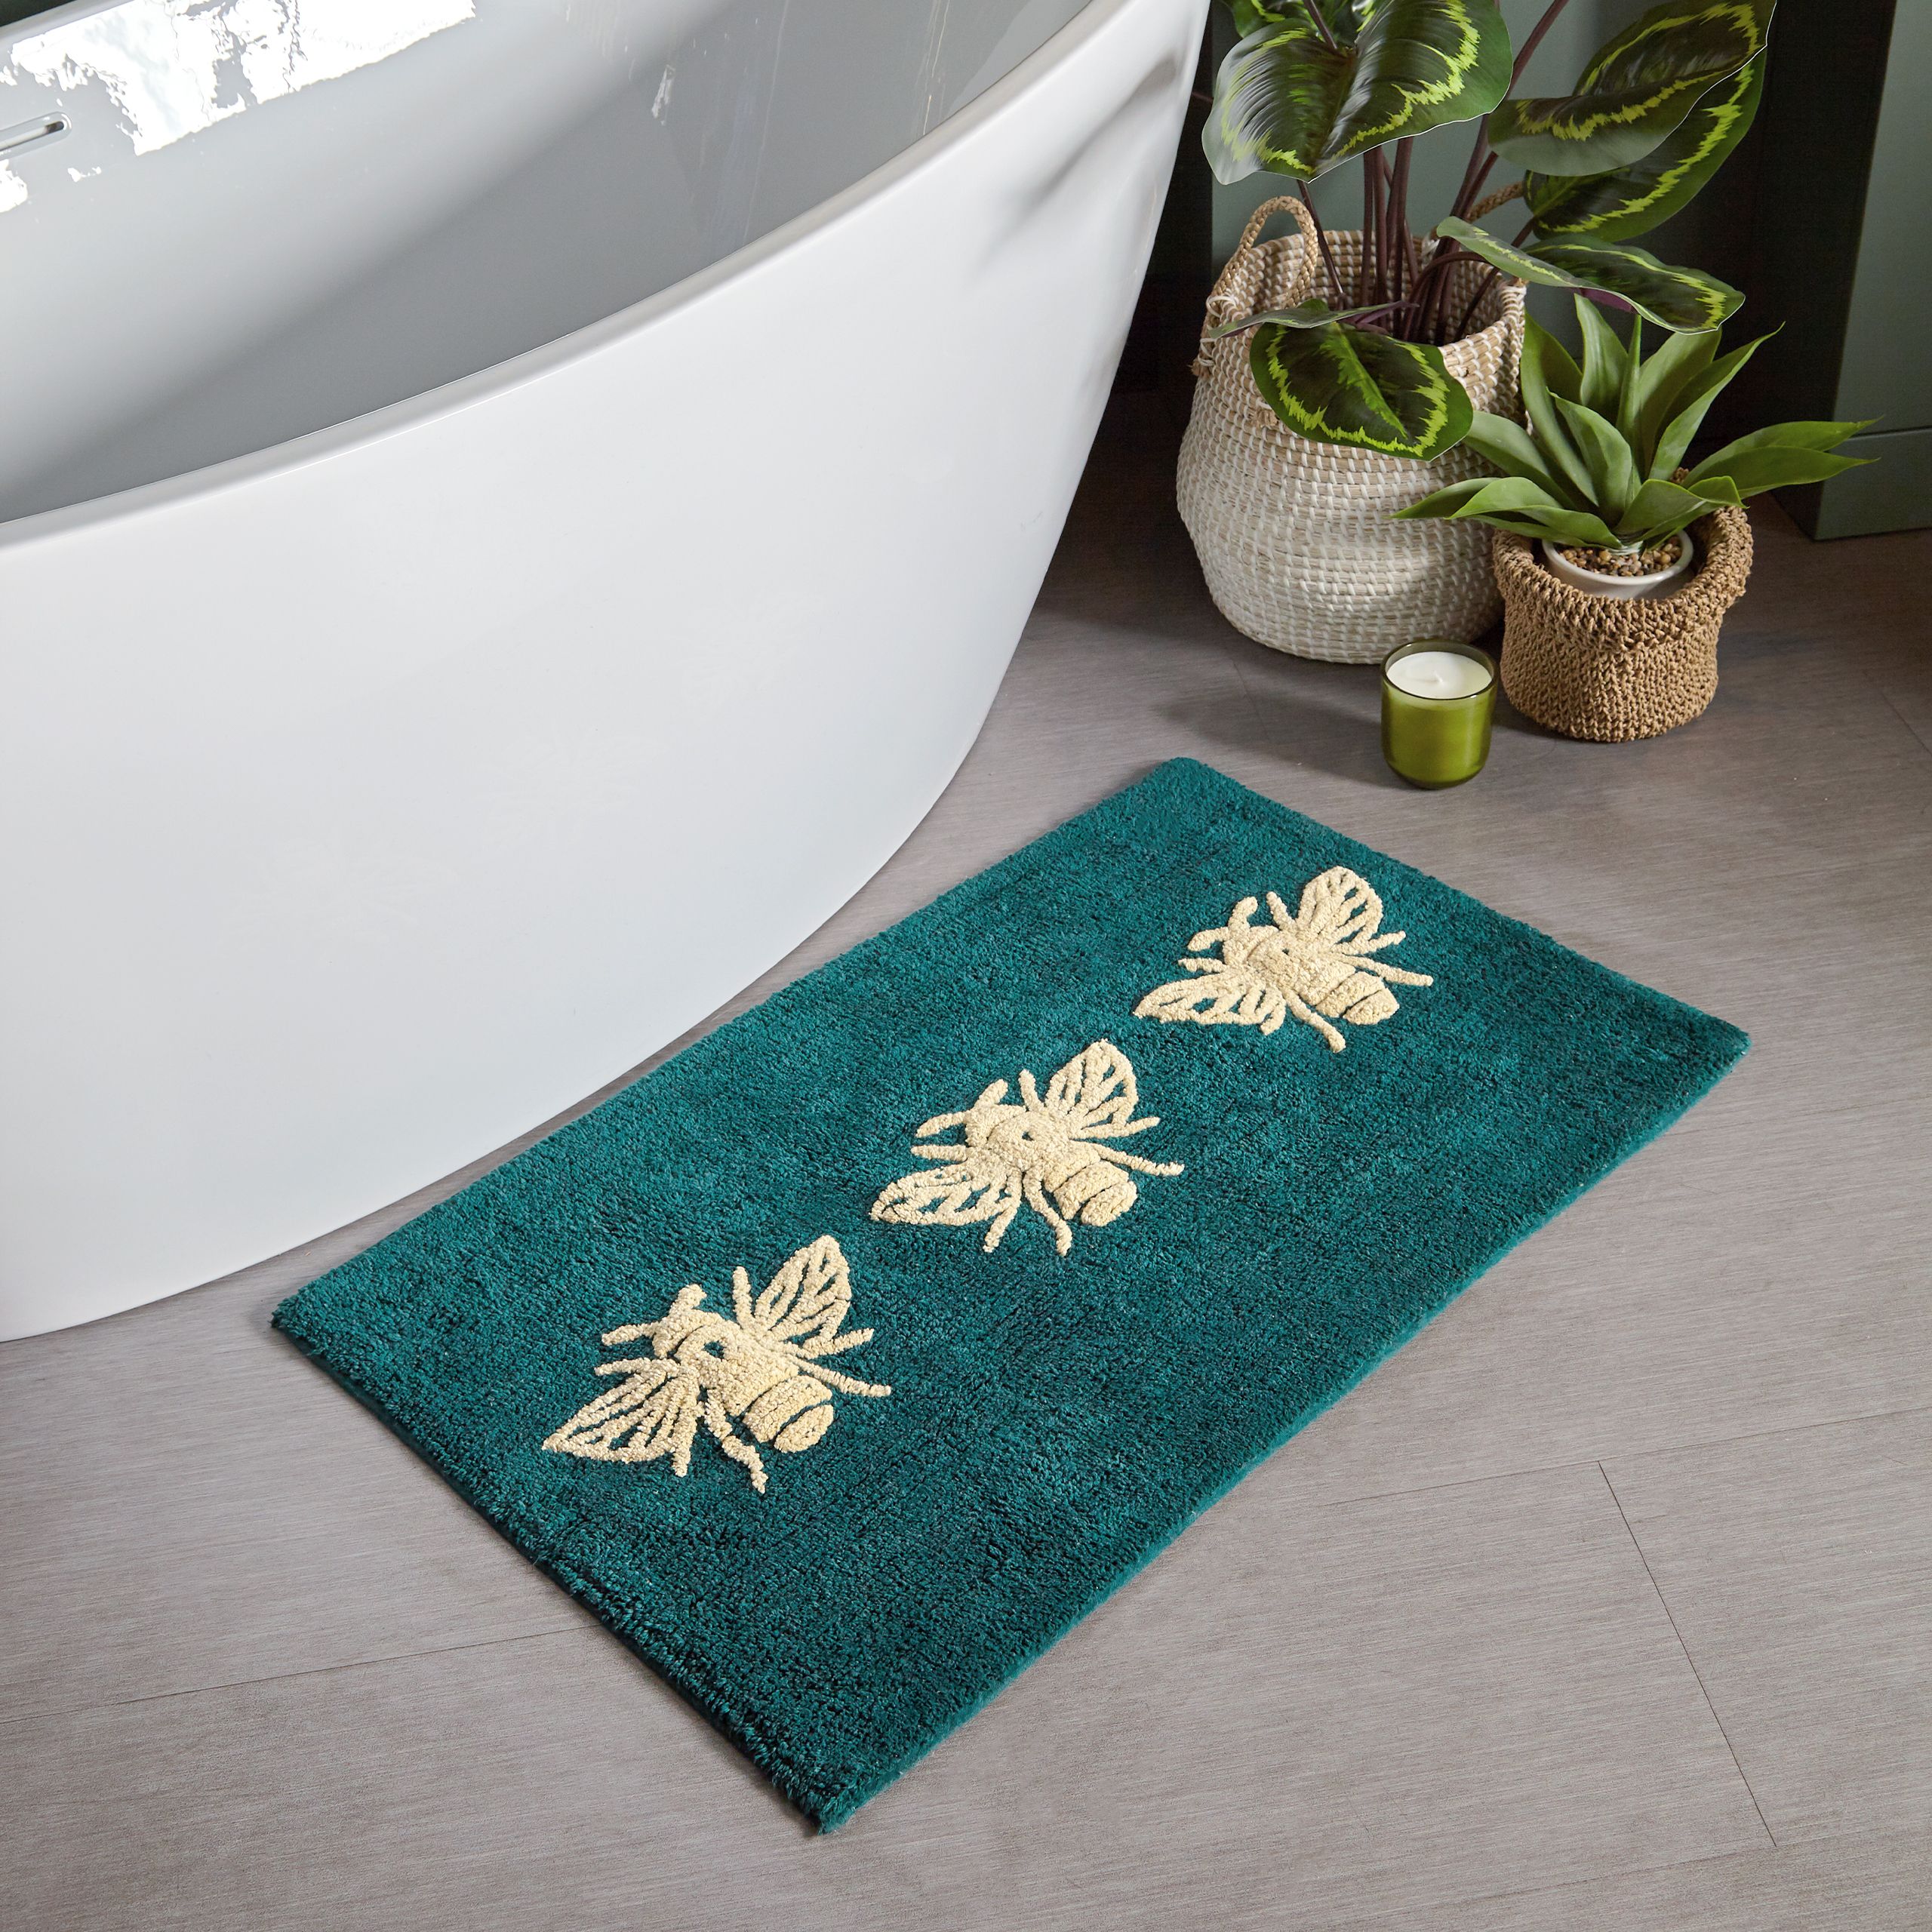 Featuring a tufted Bumblebee design on a emerald green cotton fabric. Made from 100% Cotton, making this bath mat incredibly soft under foot. This bath mat has an anti-slip quality, keeping it securely in place on your bathroom floor. The 1800 GSM ensures this bath mat is super absorbent preventing post-bath or shower puddles.